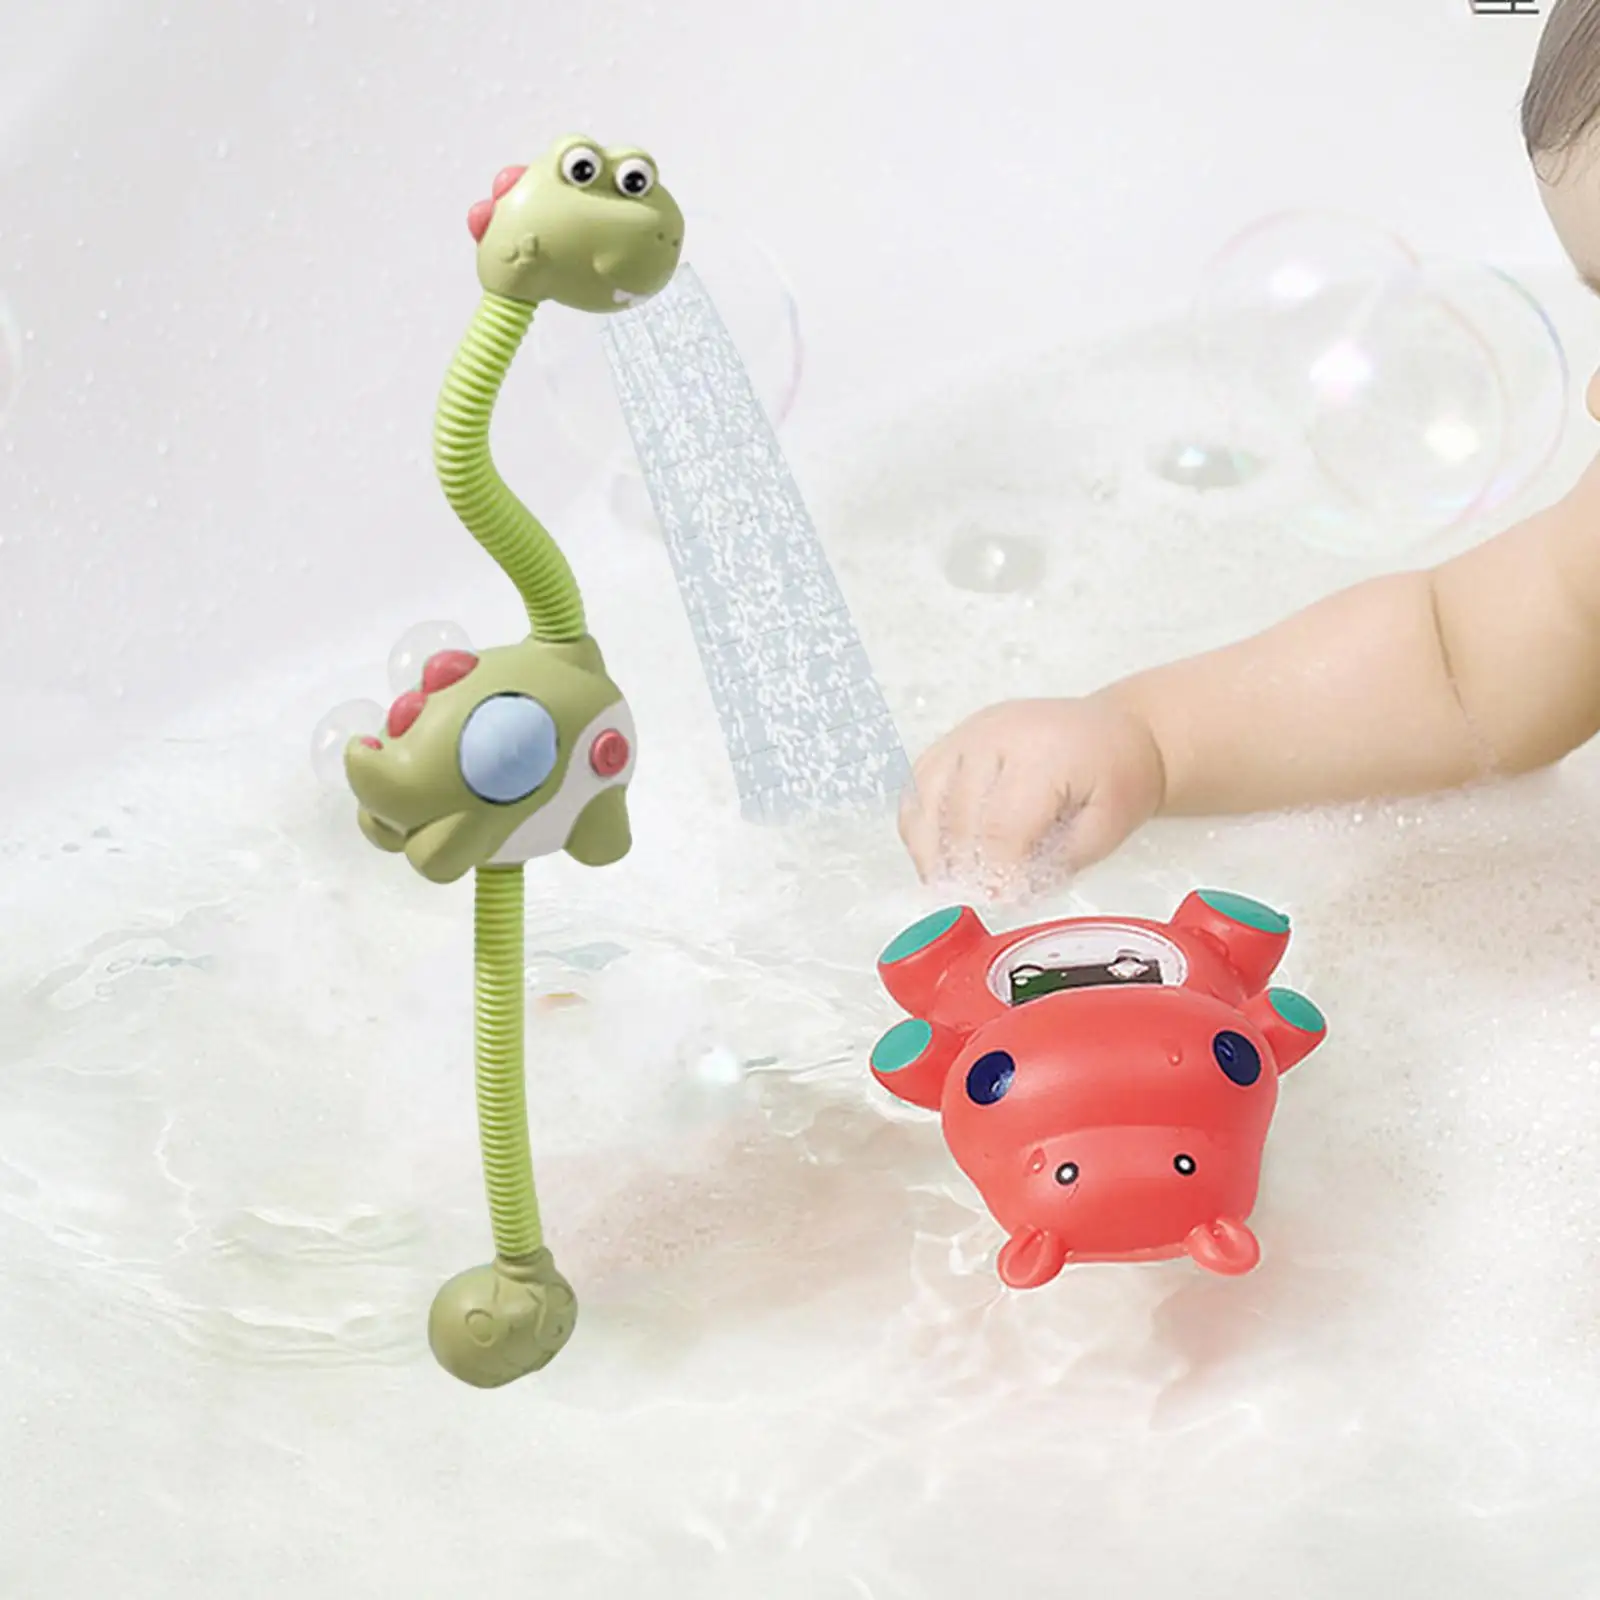 Infant Electric Shower Water Pump 360 Rotating and Adjusting Direction Bathtub Toy for Bathroom Pool Birthday Gift Toddles